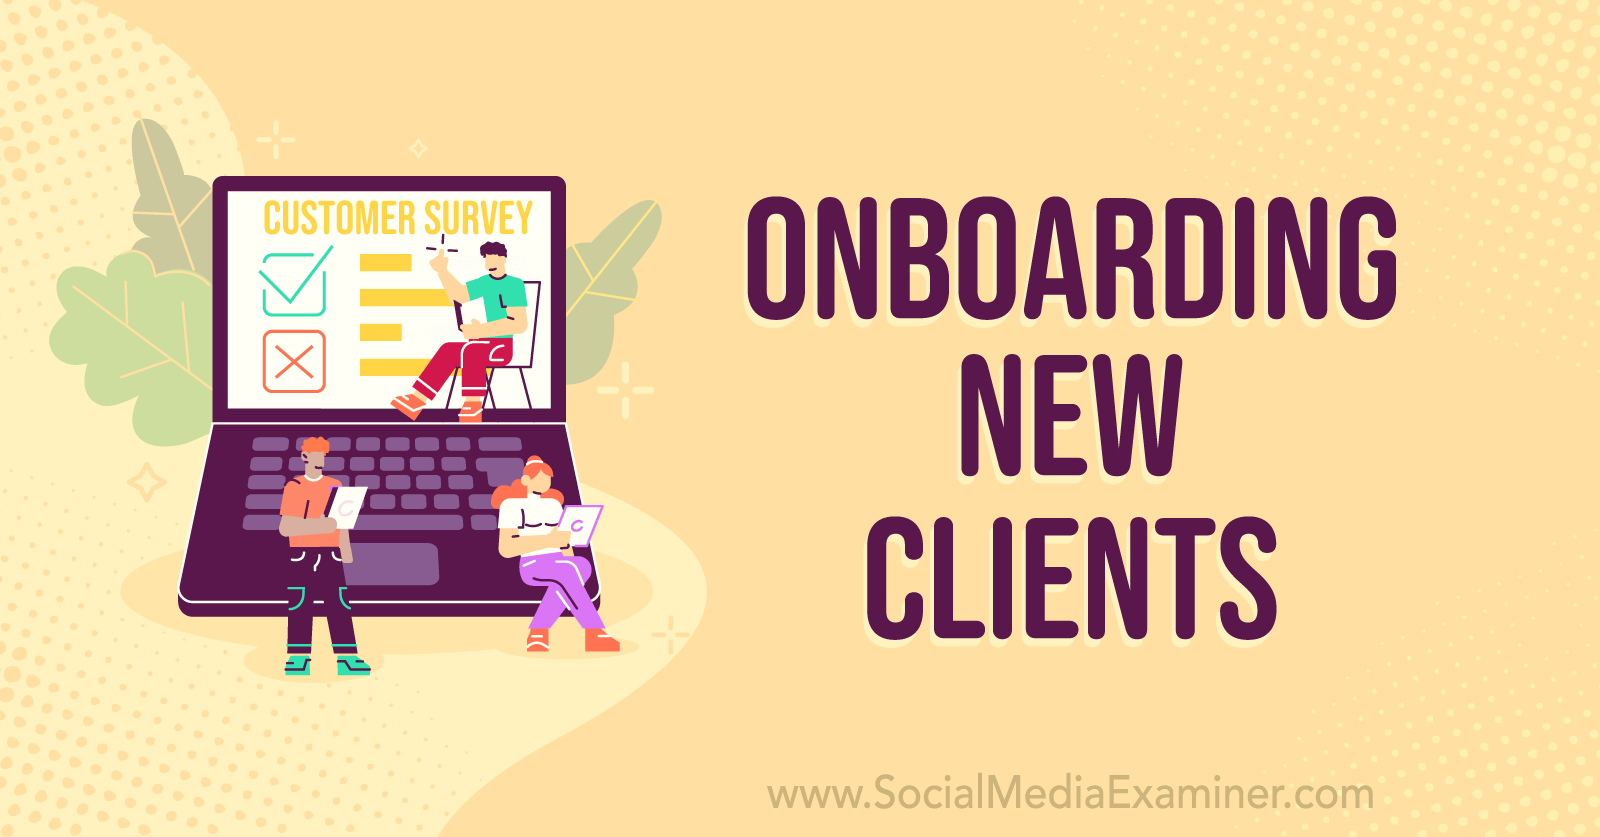 Onboarding New Clients by Social Media Examiner